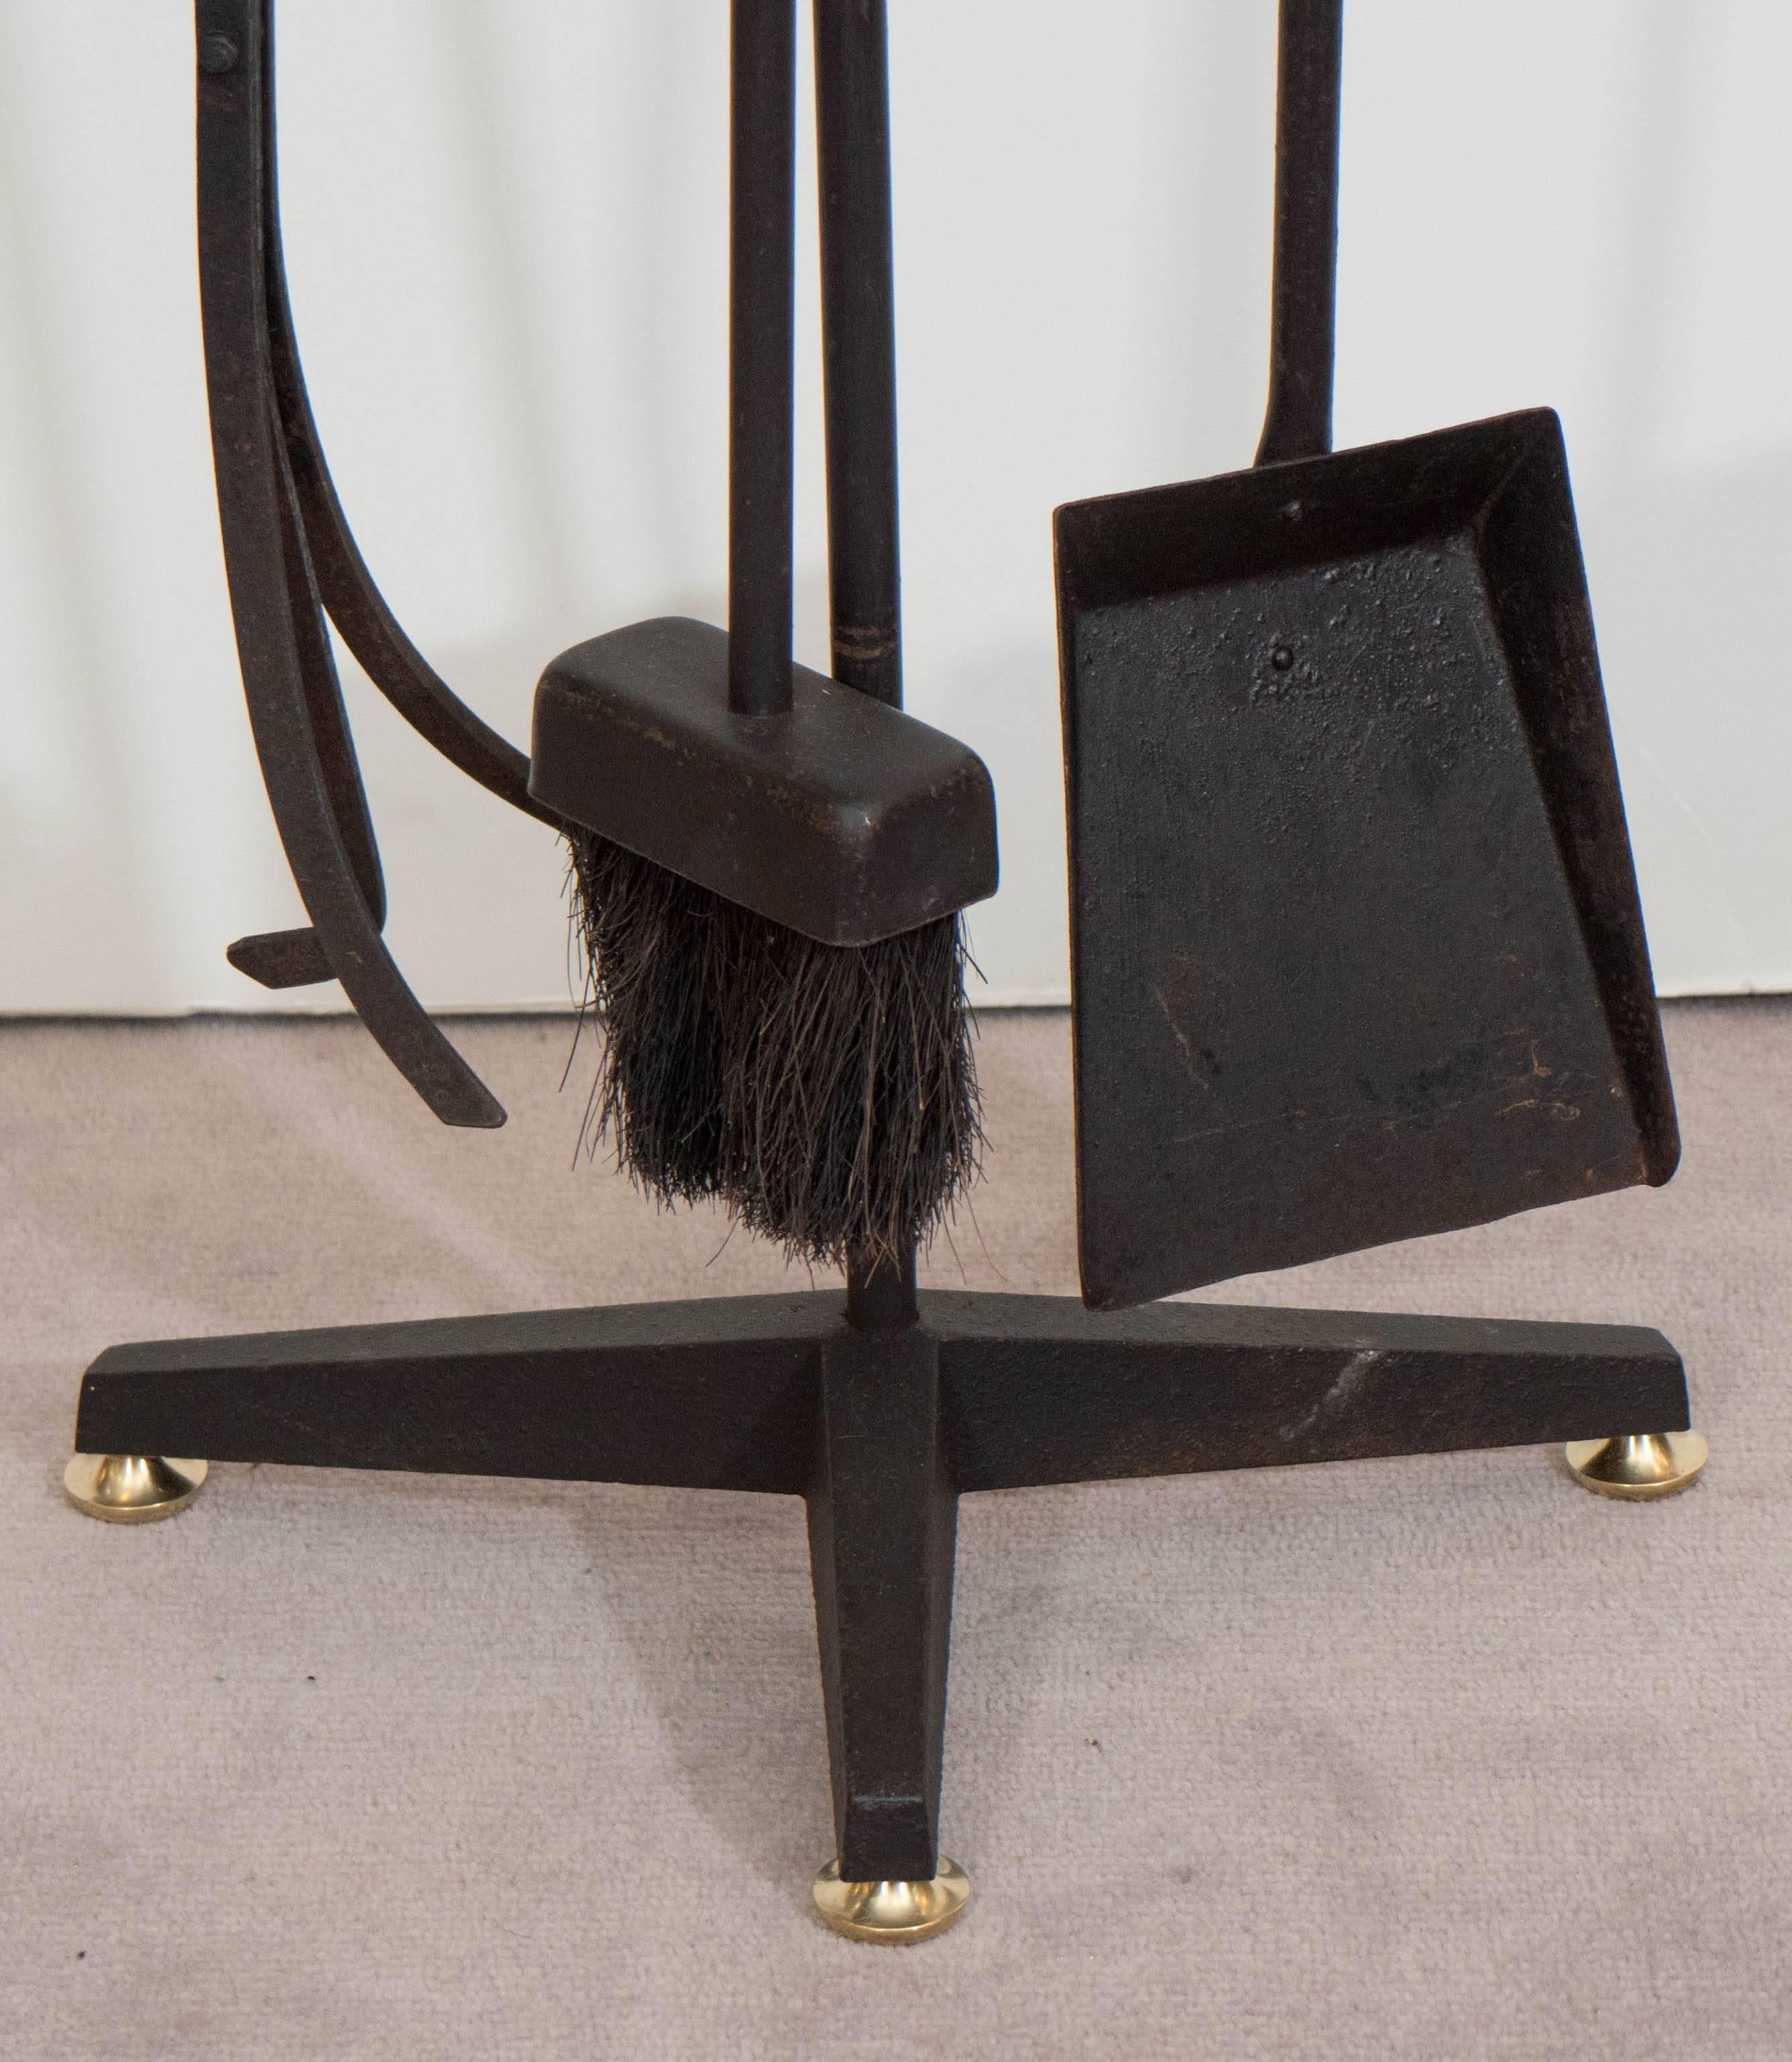 This set of fireplace tools in wrought iron, designed by Donald Deskey circa 1950s for Bennett Co., includes shovel, broom and a pair of tongs, handles detailed with brass ball finial, on a tripod stand. Despite some rusting, as well as presence of